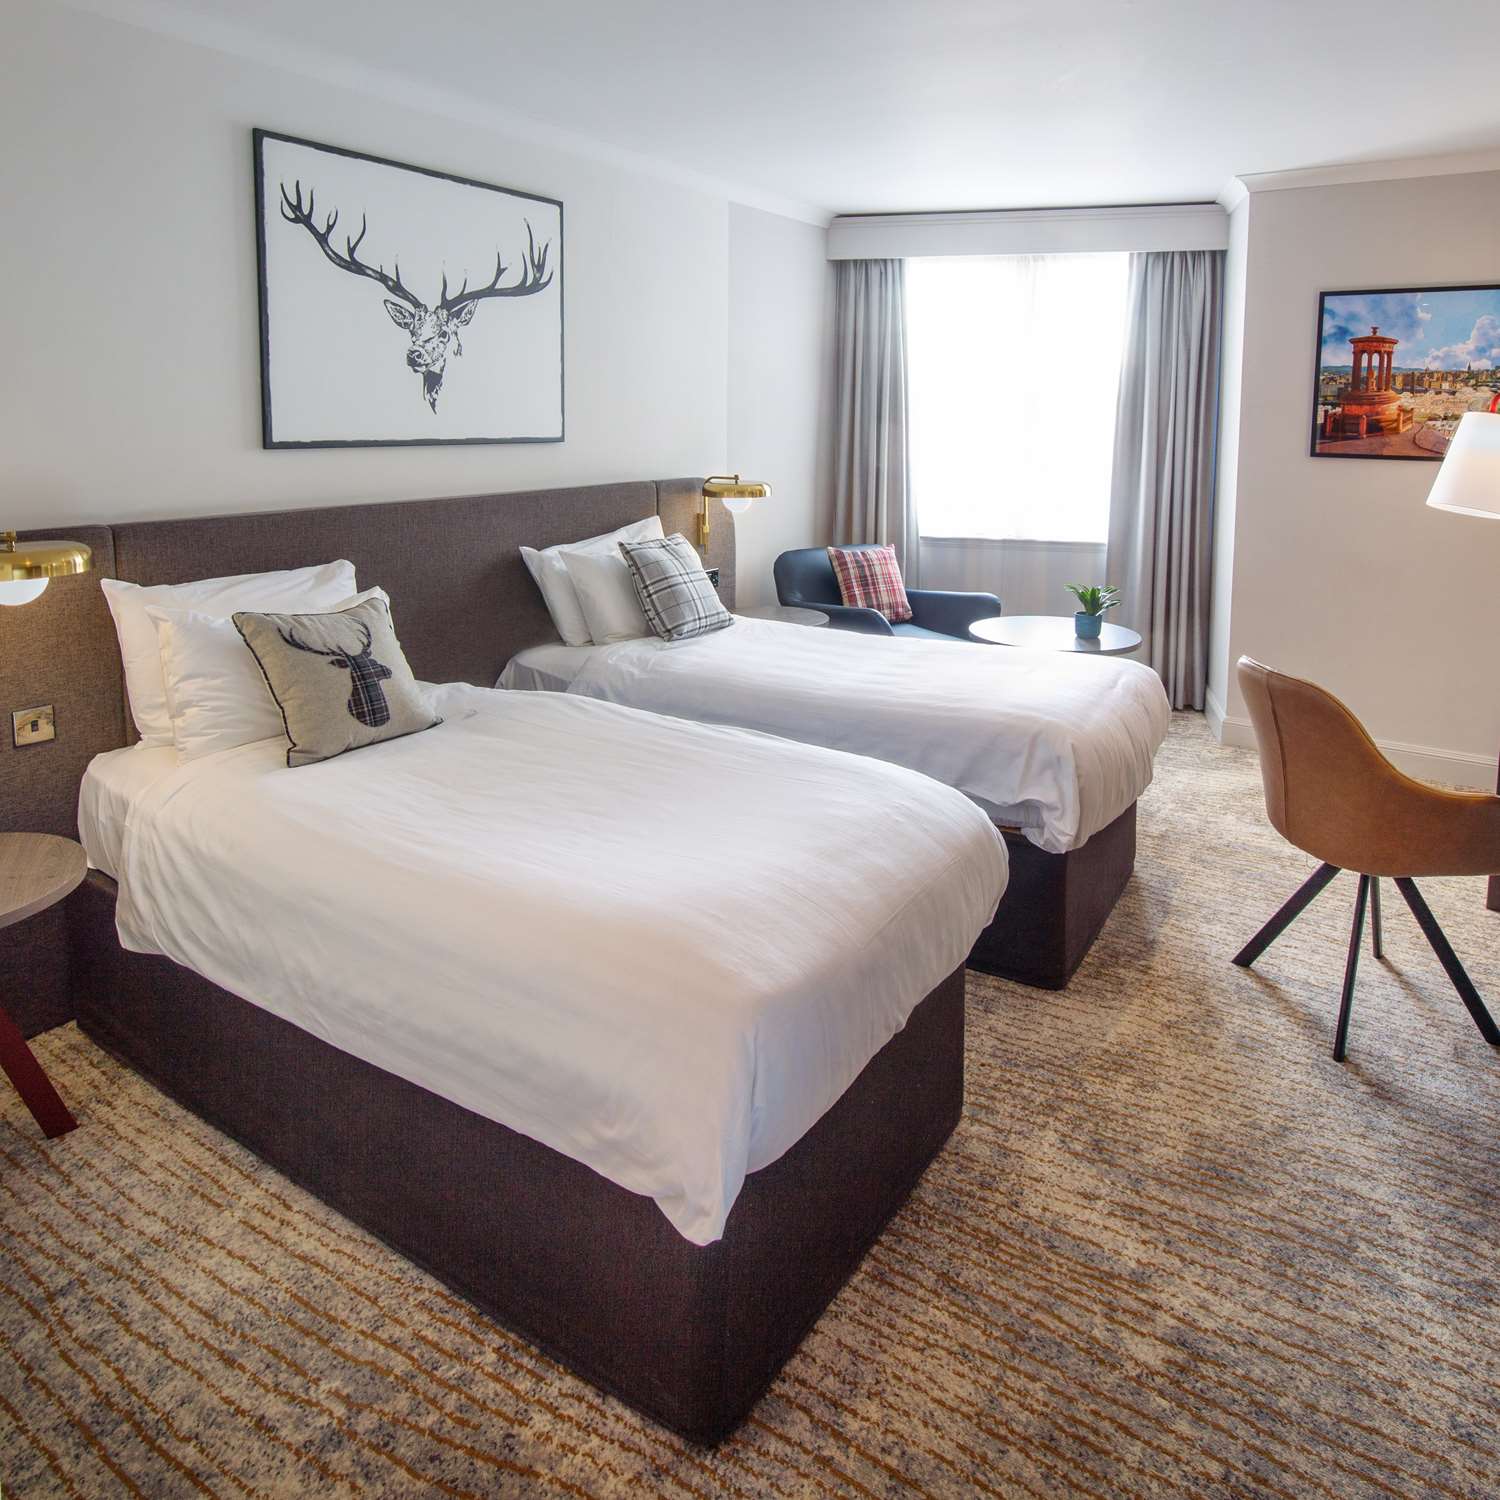 Caledonian Inn Robe, Take the Same Level of Luxury to Your Hotel